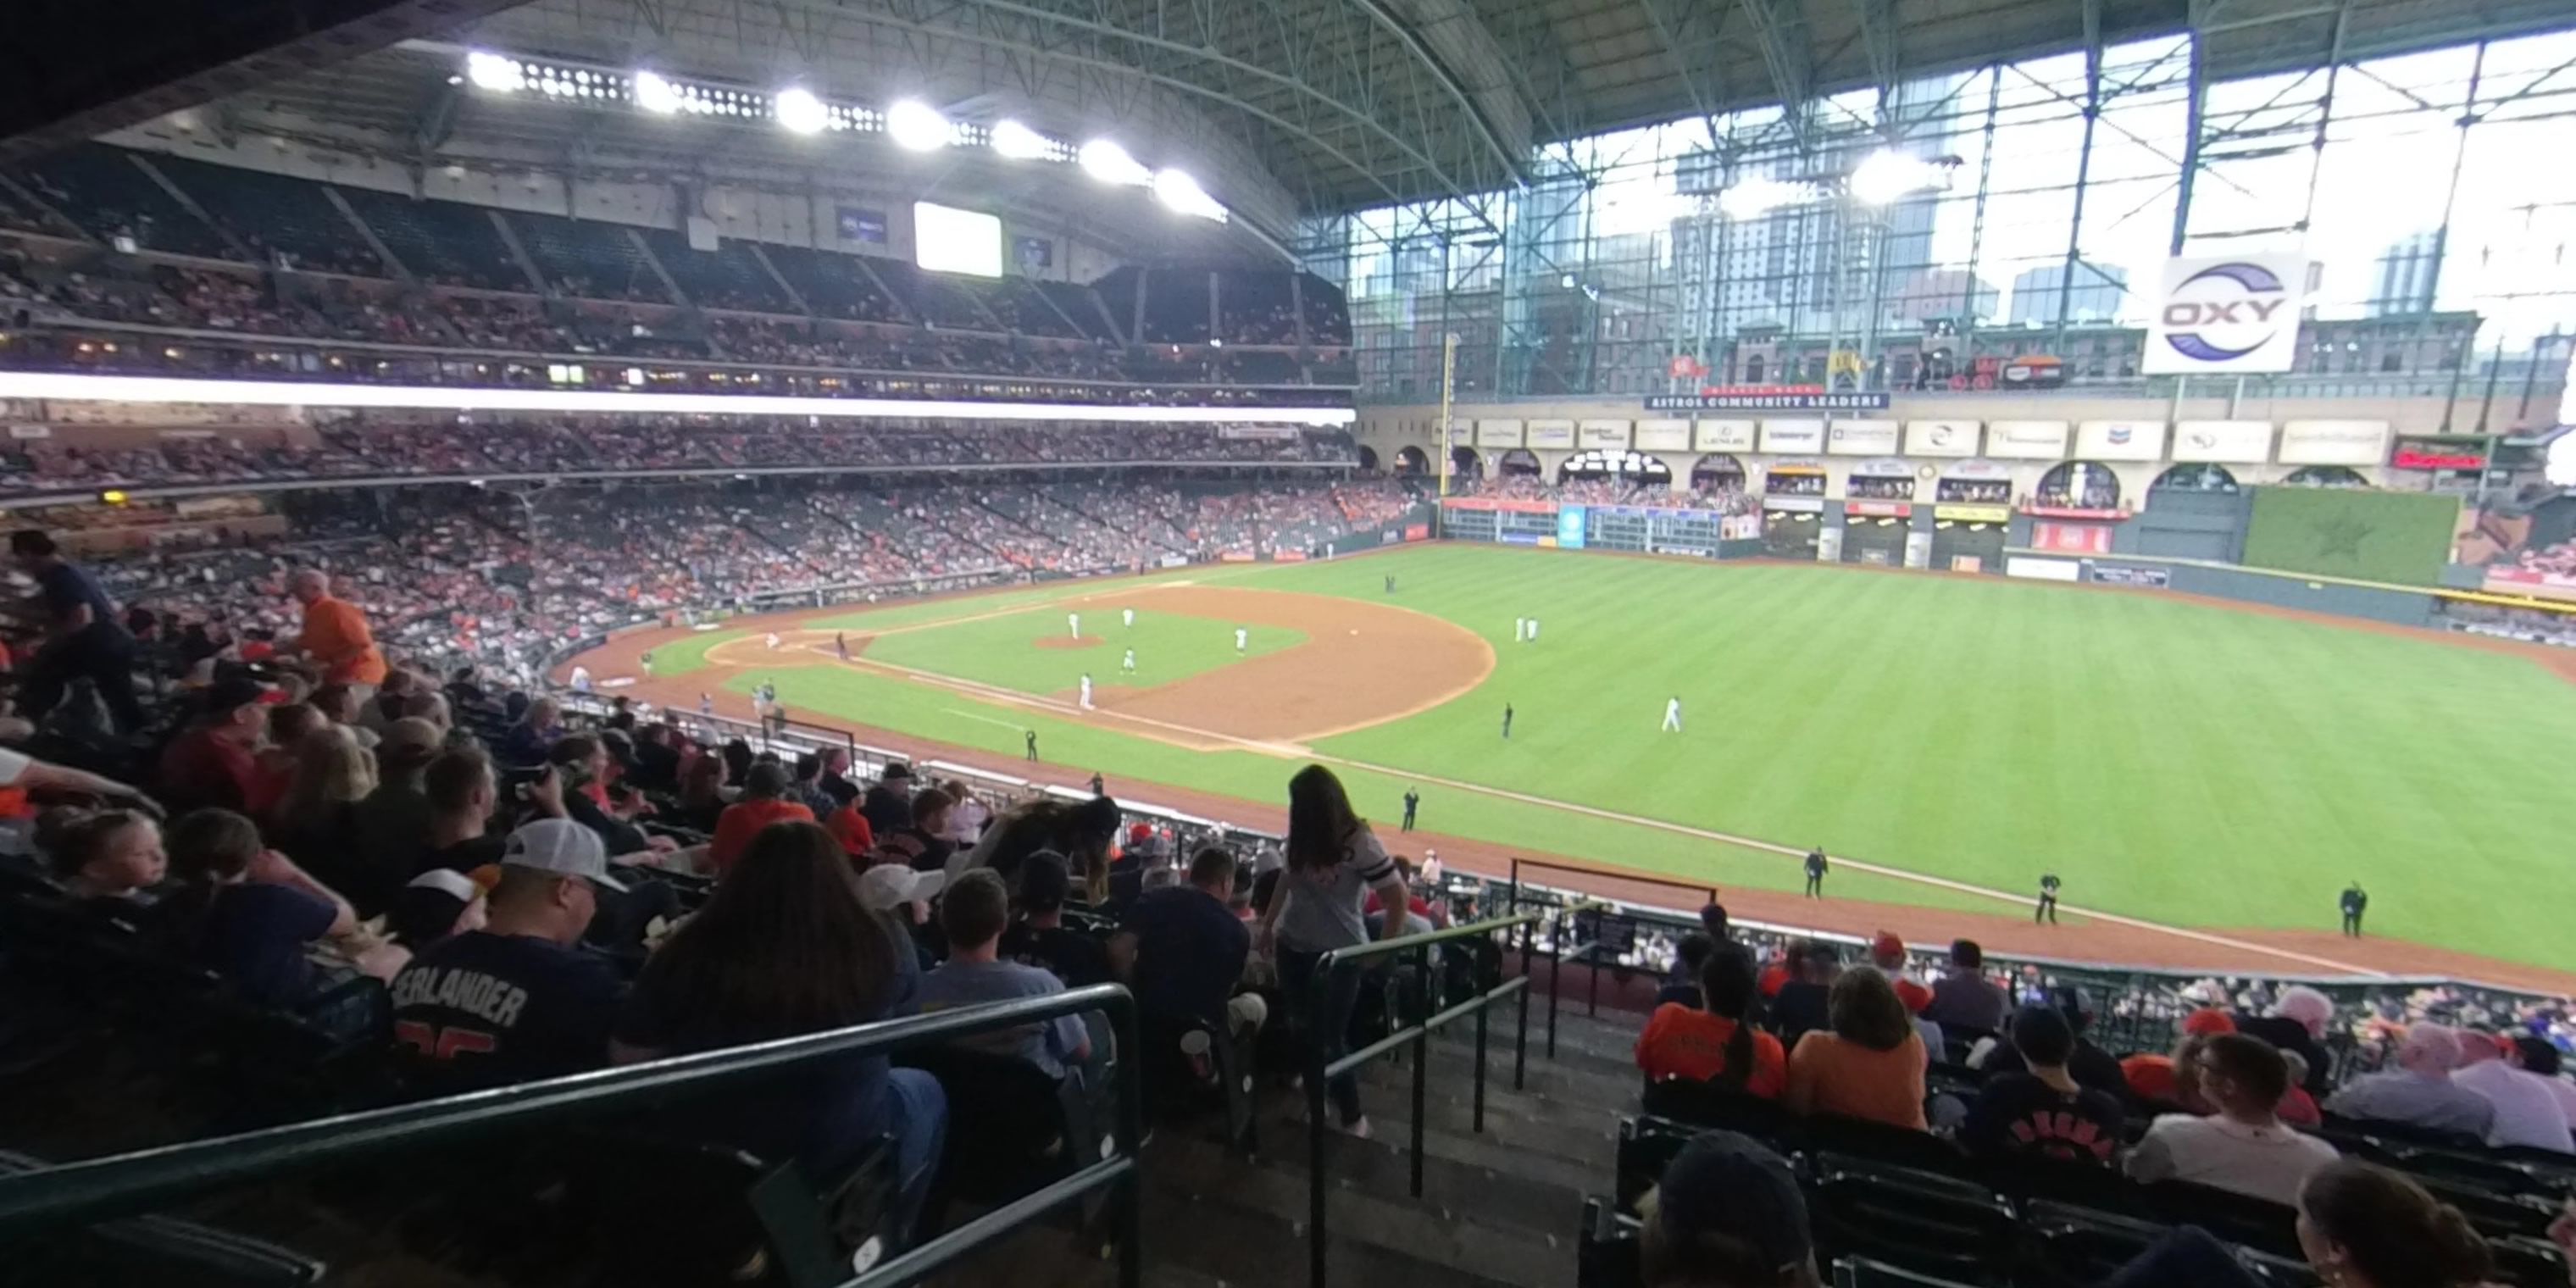 section 229 panoramic seat view  for baseball - minute maid park